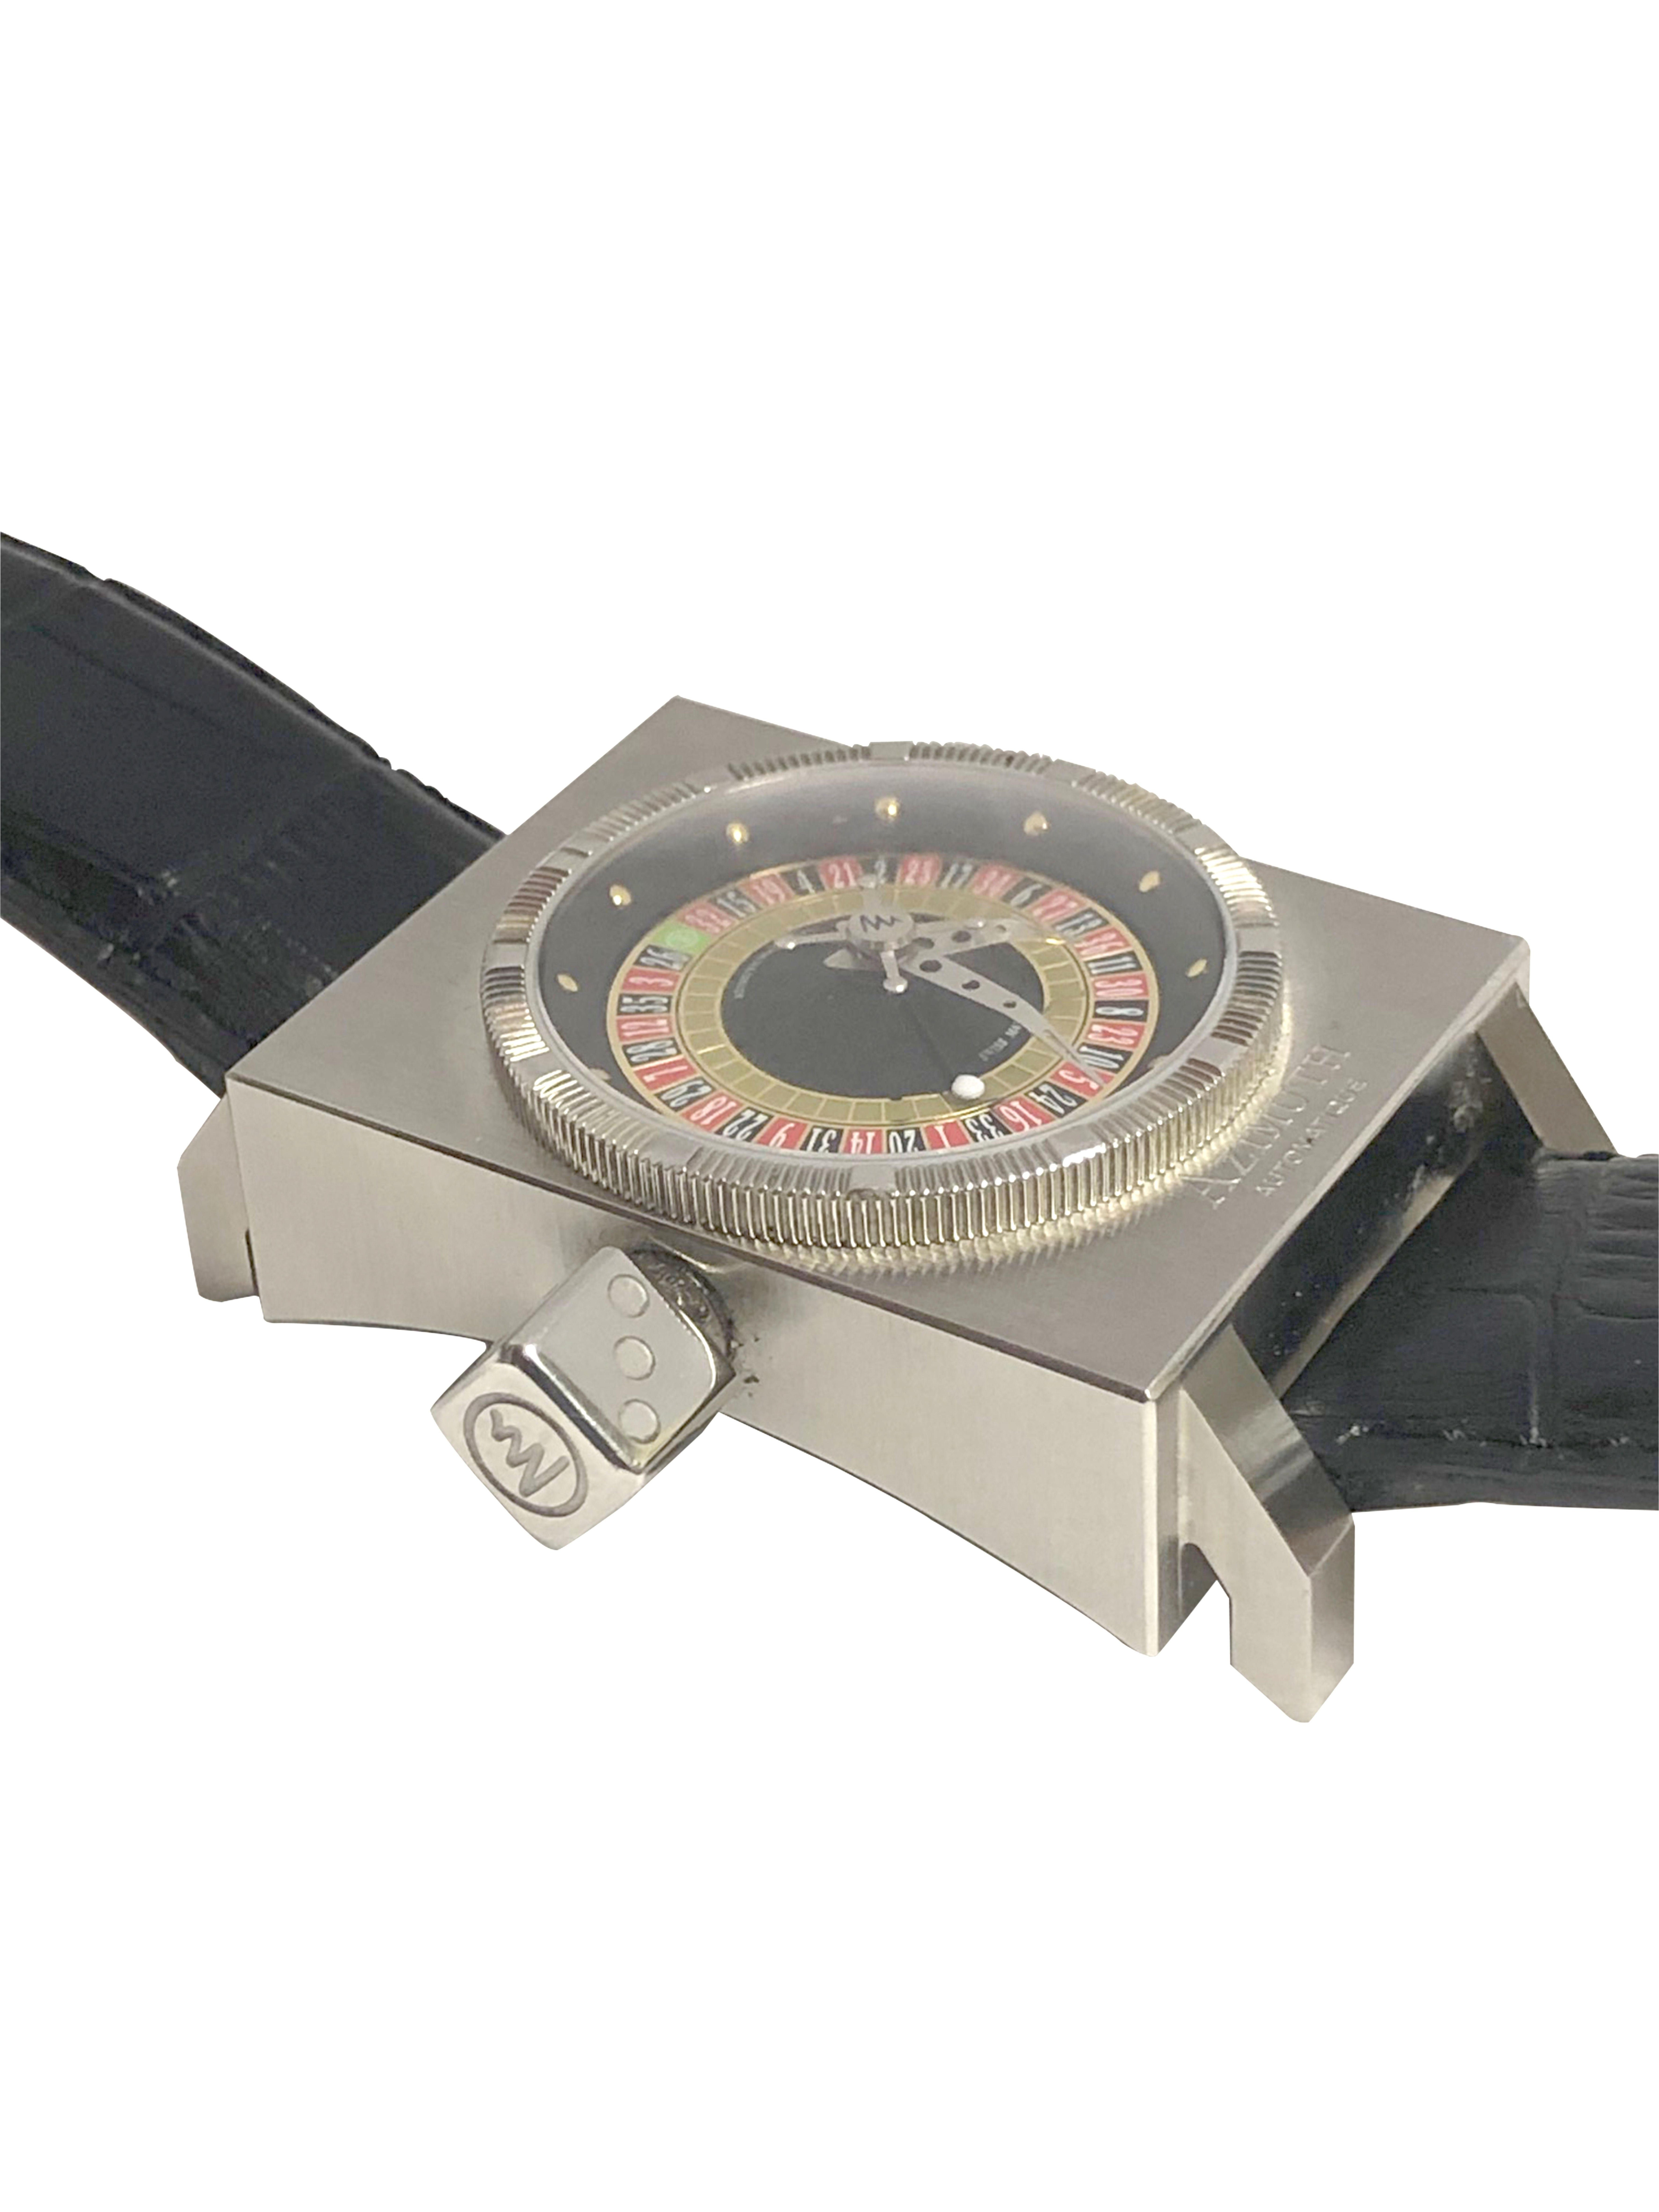 azimuth roulette watch